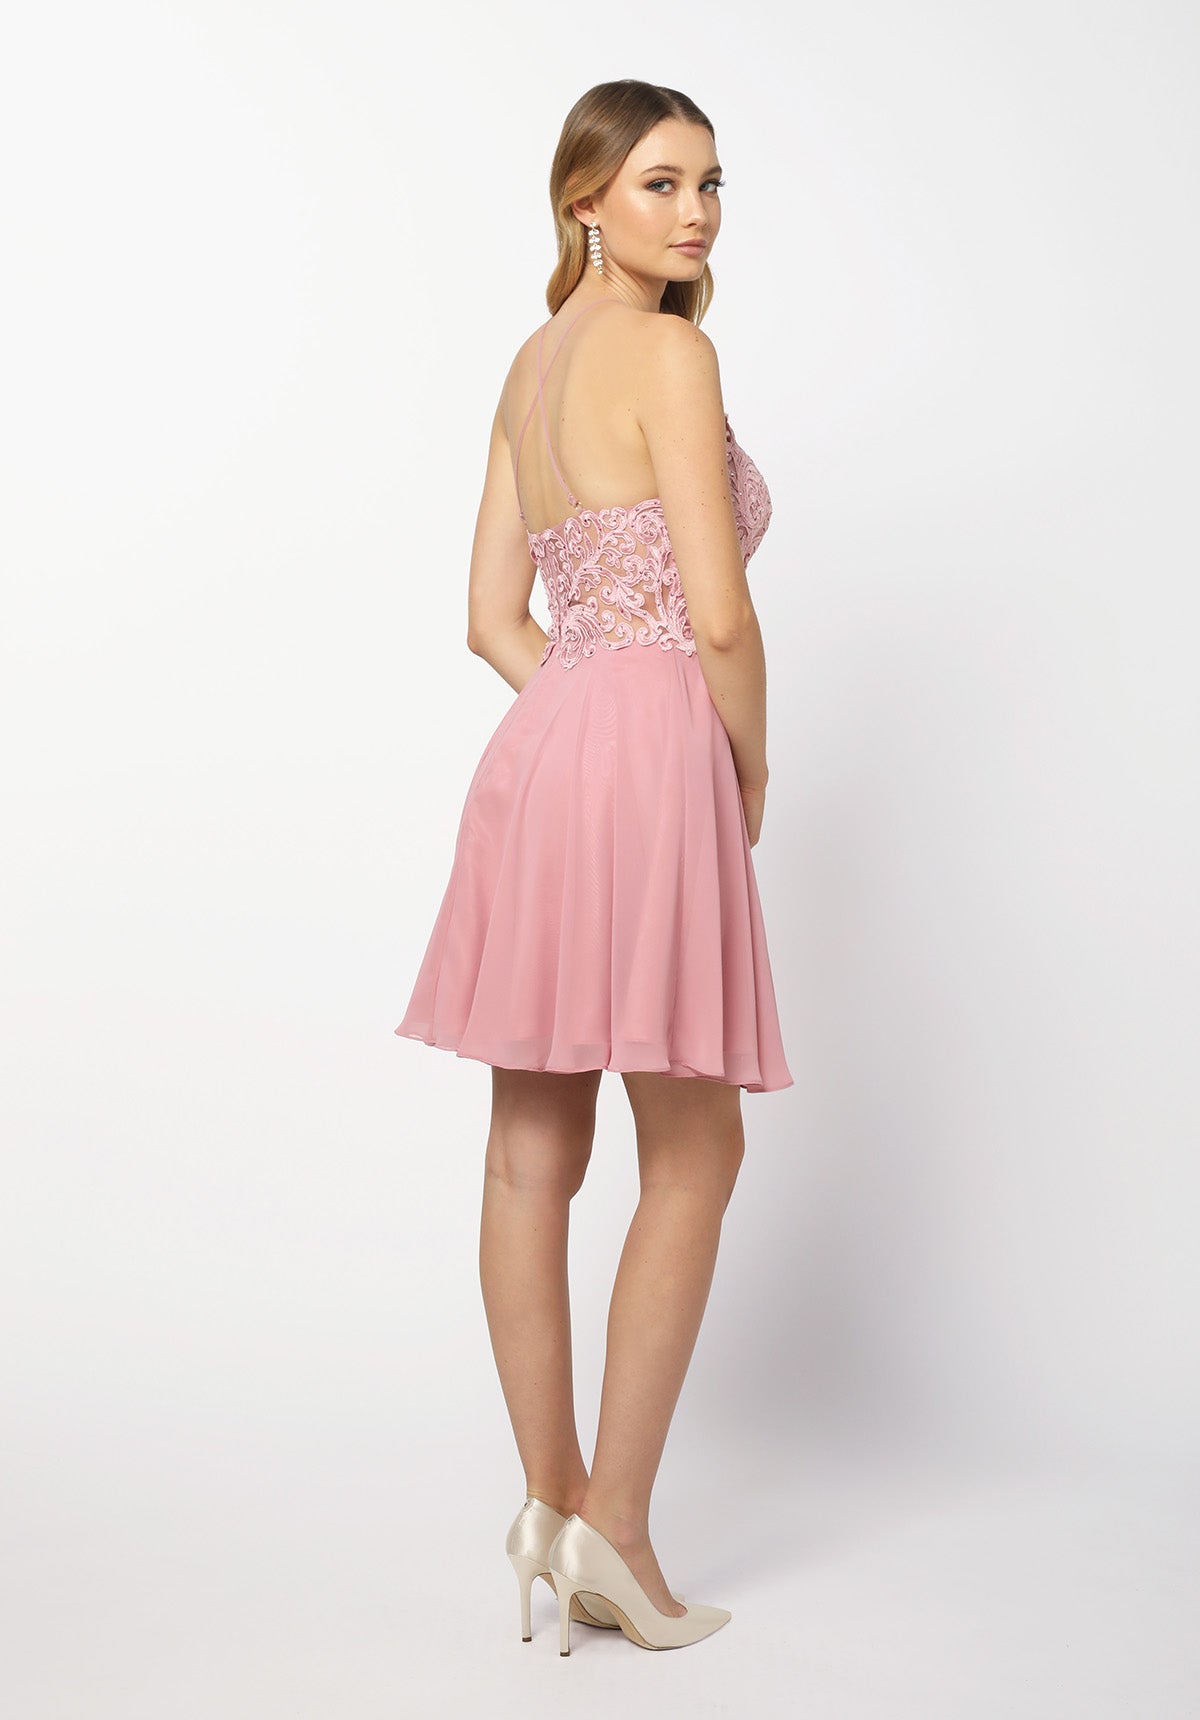 Short Chiffon Dress With Applique Bodice By Nox Anabel -A615